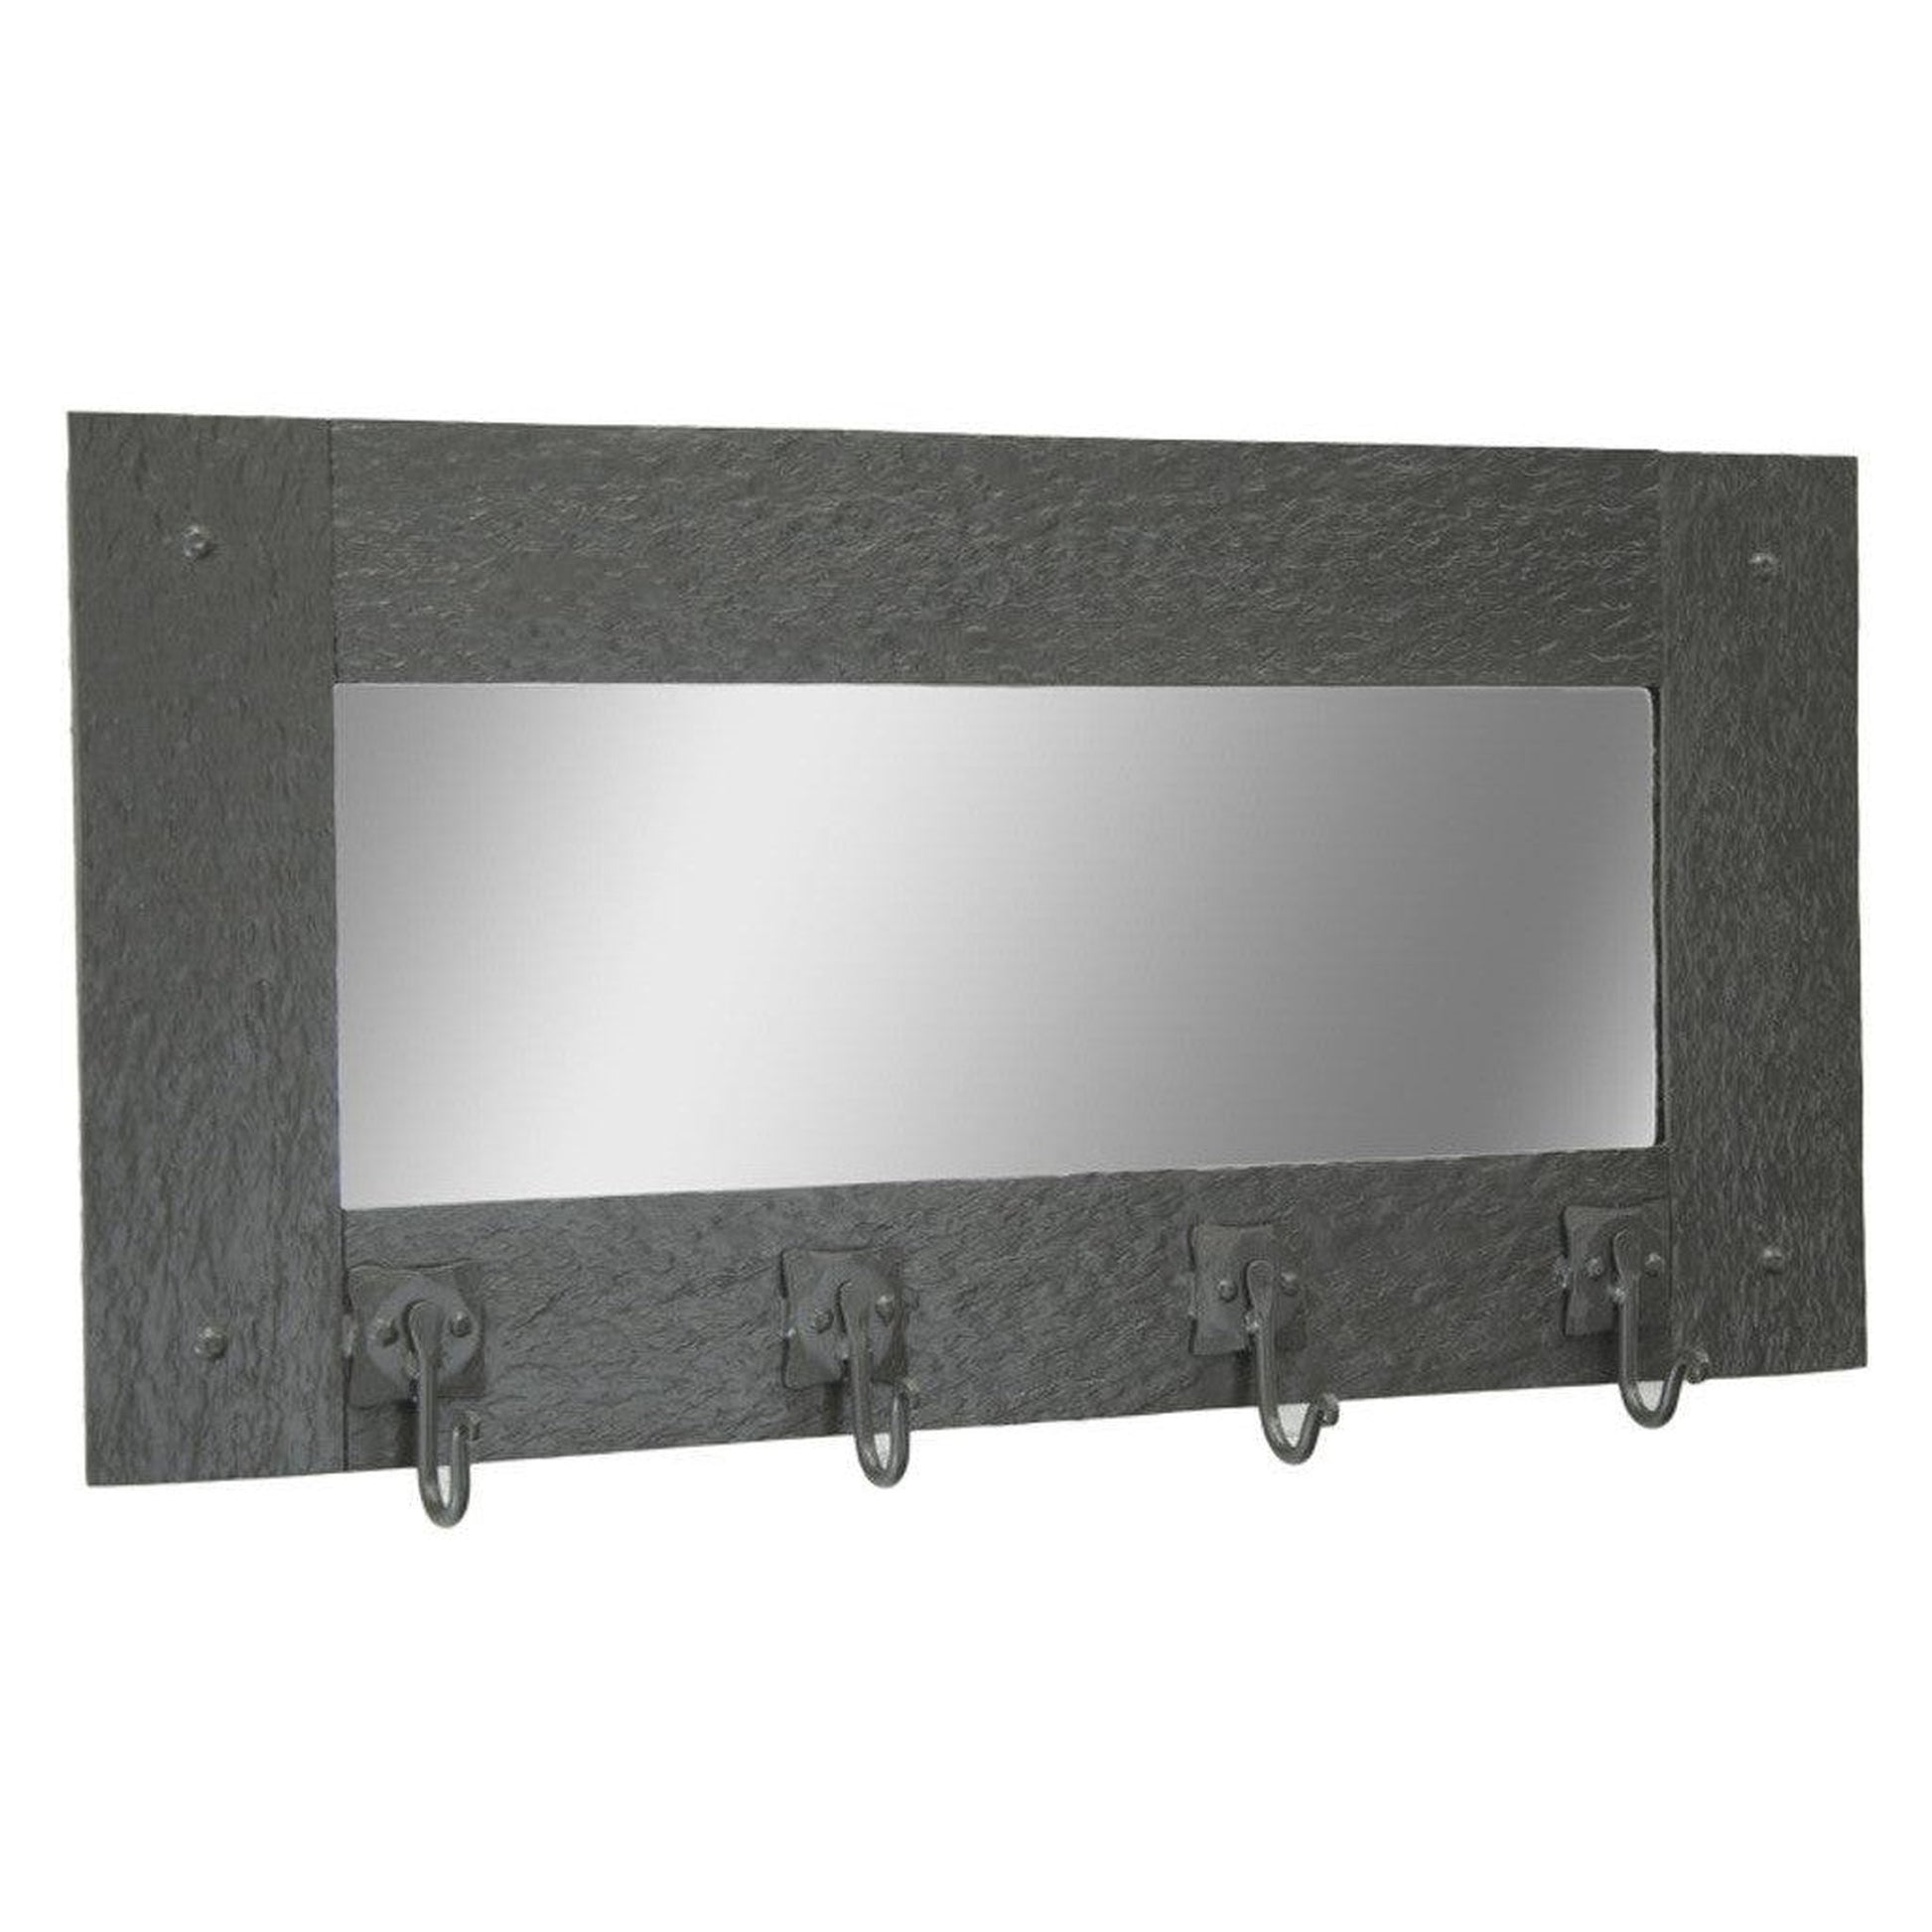 Stone County Ironworks Cedarvale 40" Large Woodland Brown Iron Wall Mirror Coat Rack With Pewter Iron Accent and 8 Hooks